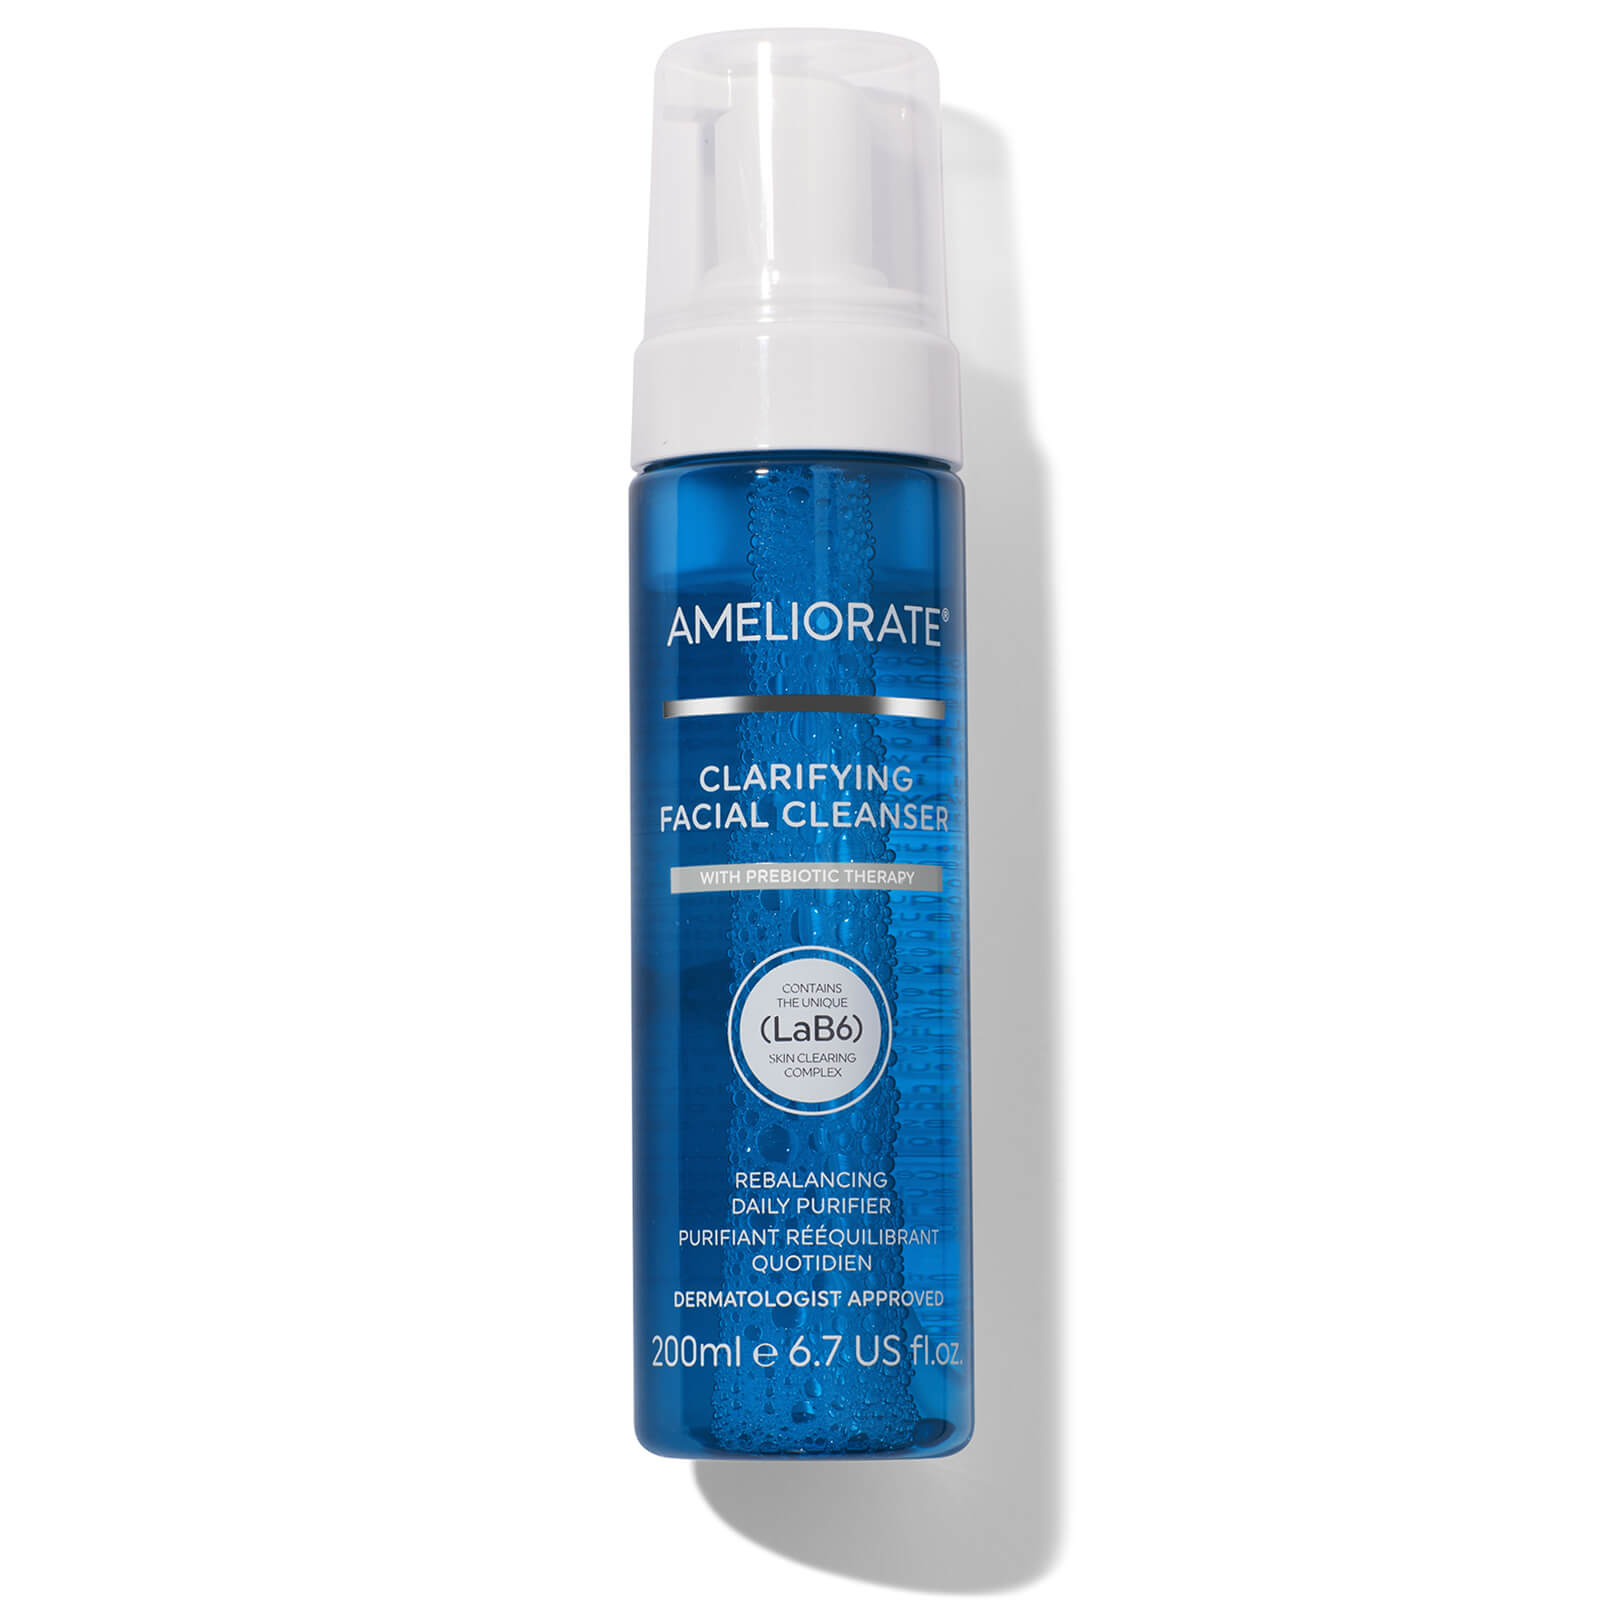 Image of AMELIORATE Clarifying Facial Cleanser 200ml